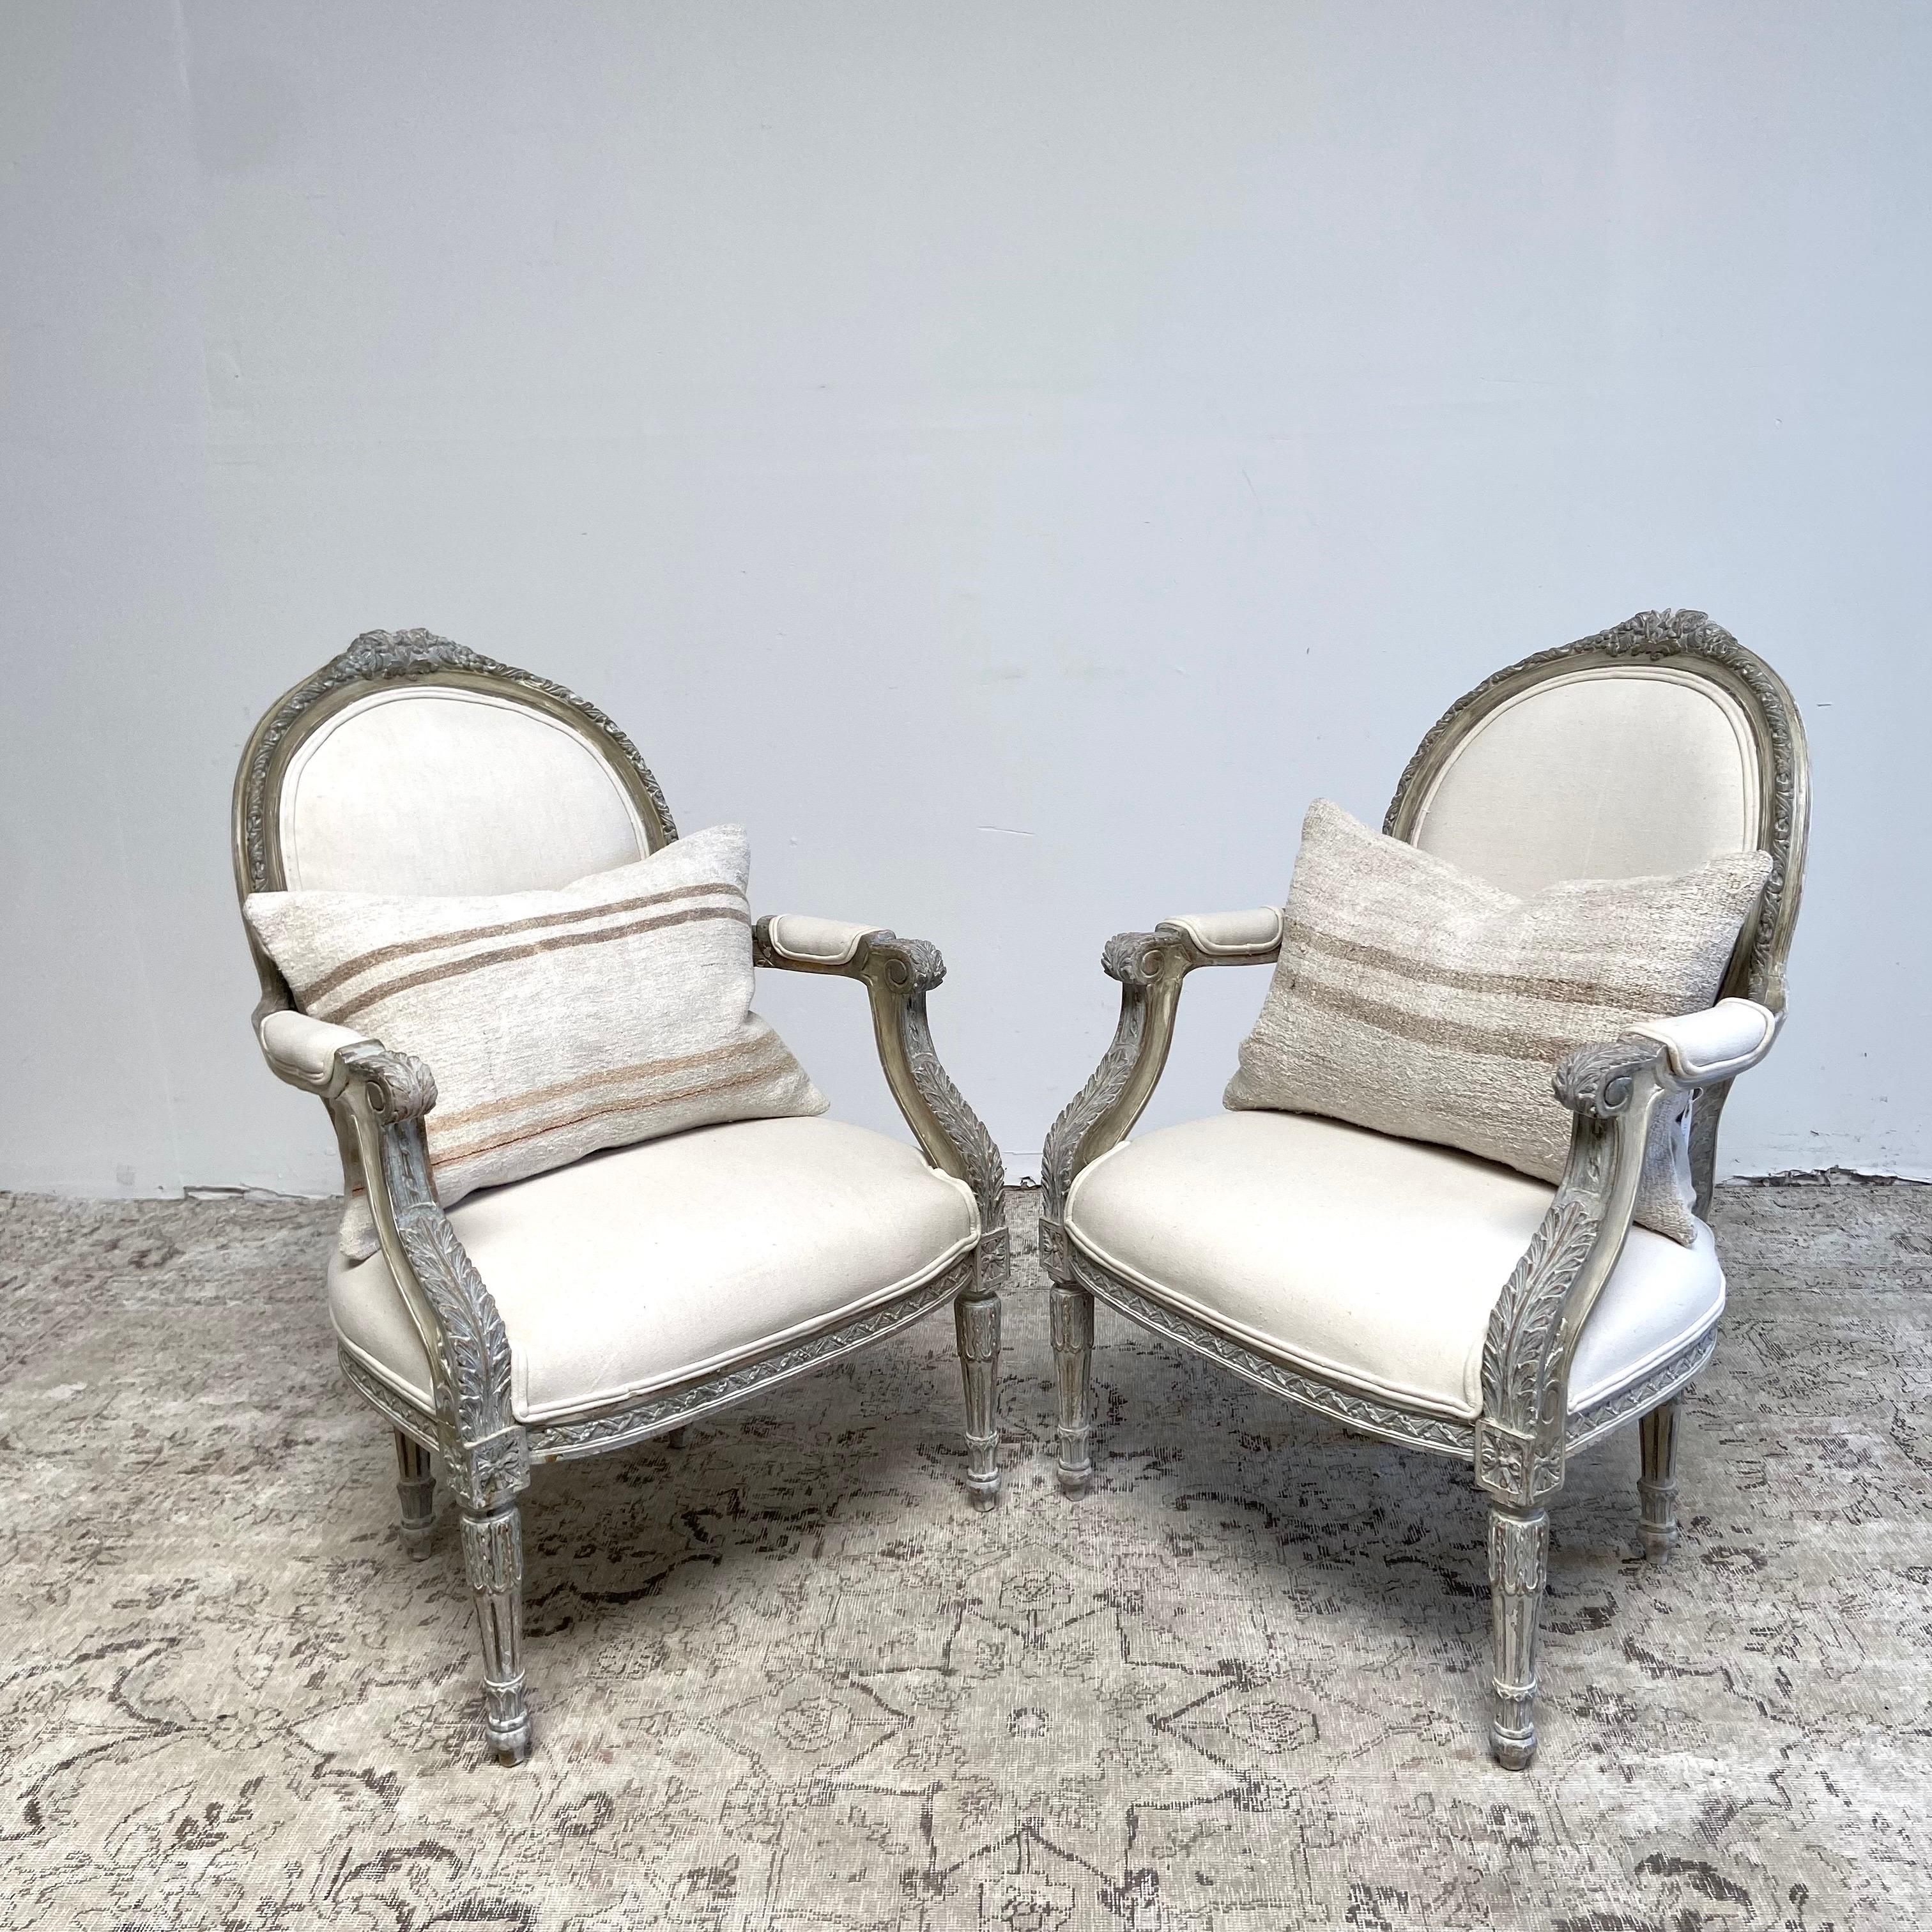 Pair open arm chairs 26”w x 27”d x 38”h
Seat H:17”. Seat D:20”. Arm H:25”
Louis XVI Style with painted gray finish with subtle distressed edges, and cotton upholtery.
Legs are solid and sturdy ready for everyday use. These can be reupholstered in